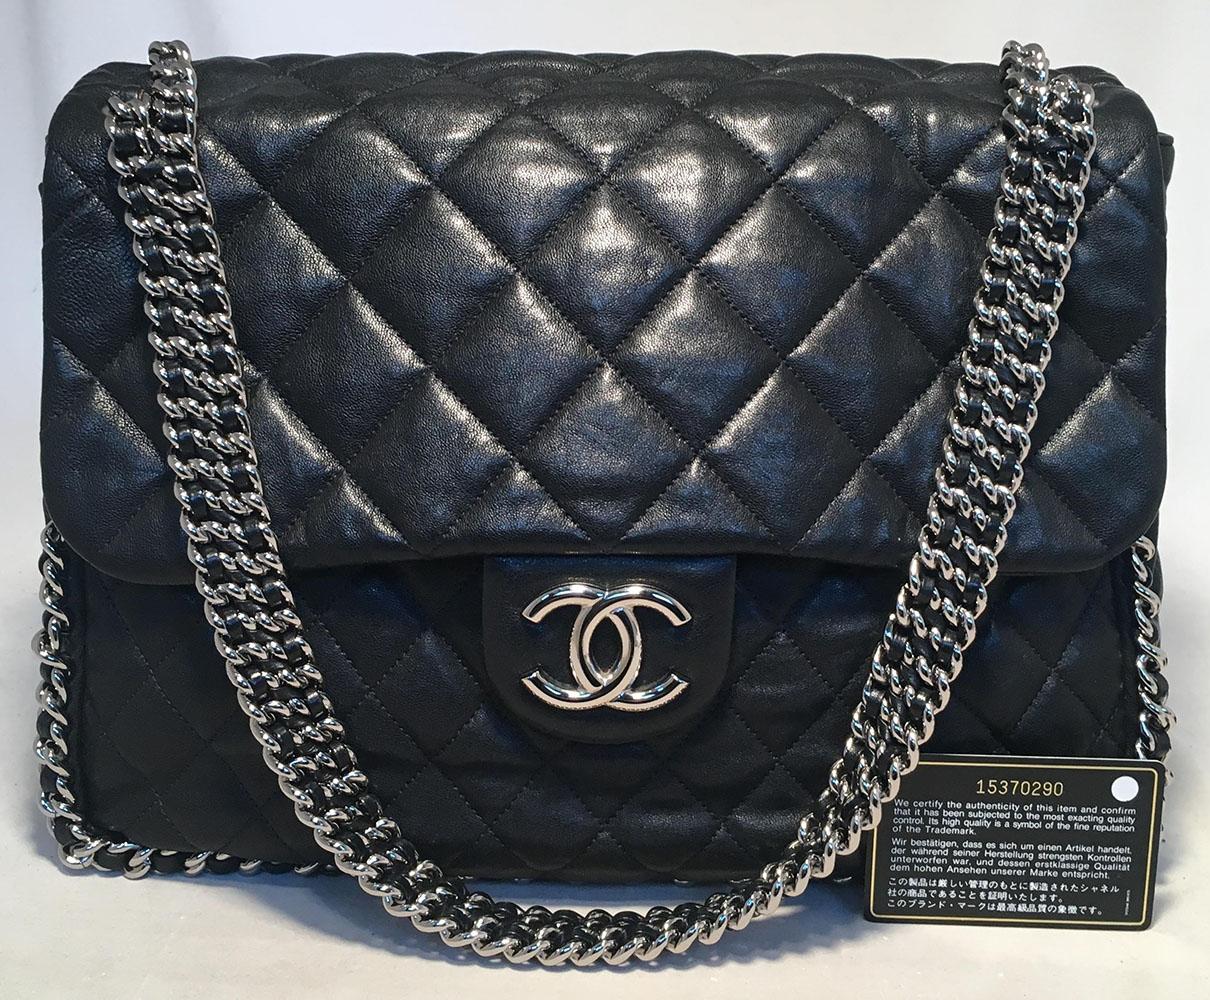 Chanel Black Quilted Leather Chain Trim Classic Maxi Flap Shoulder Bag 1